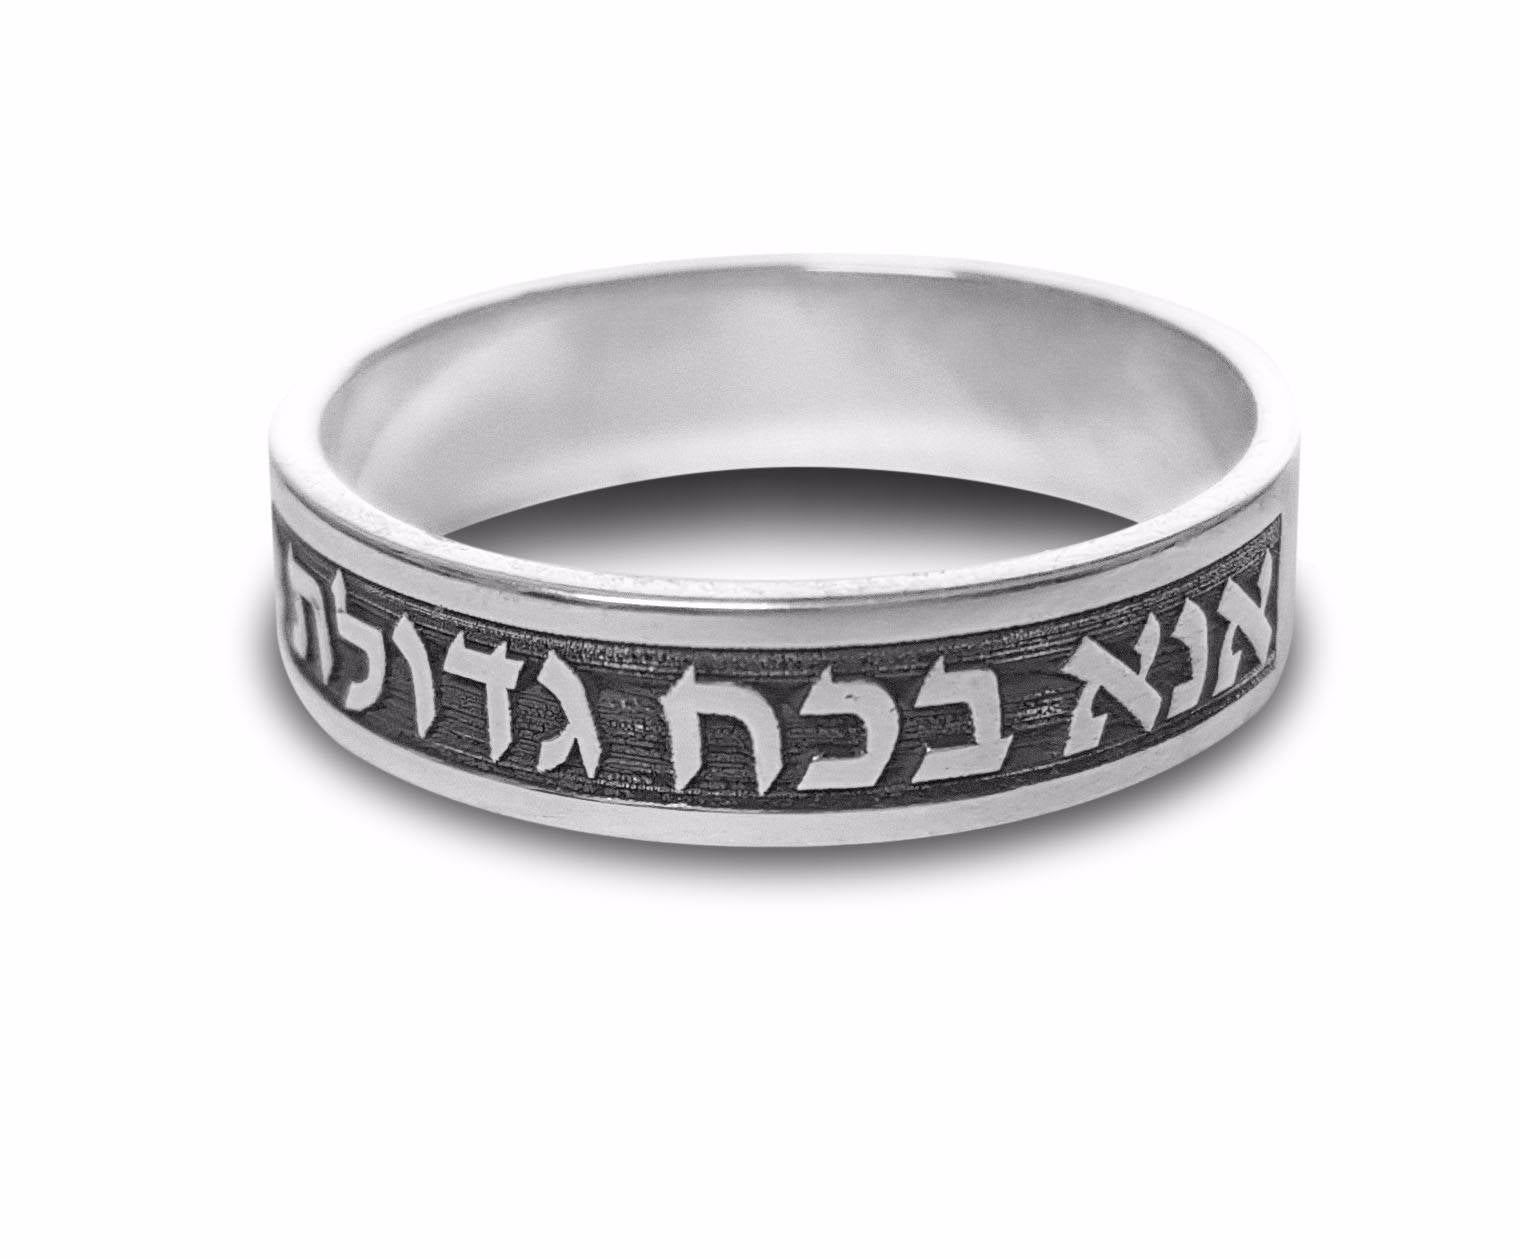 Ana Bekoach Ring| Hebrew Wedding Ring sterling silver ring| Unisex Ring personal Message Hebrew Kaballah Ring from Israel jewish Jewelry